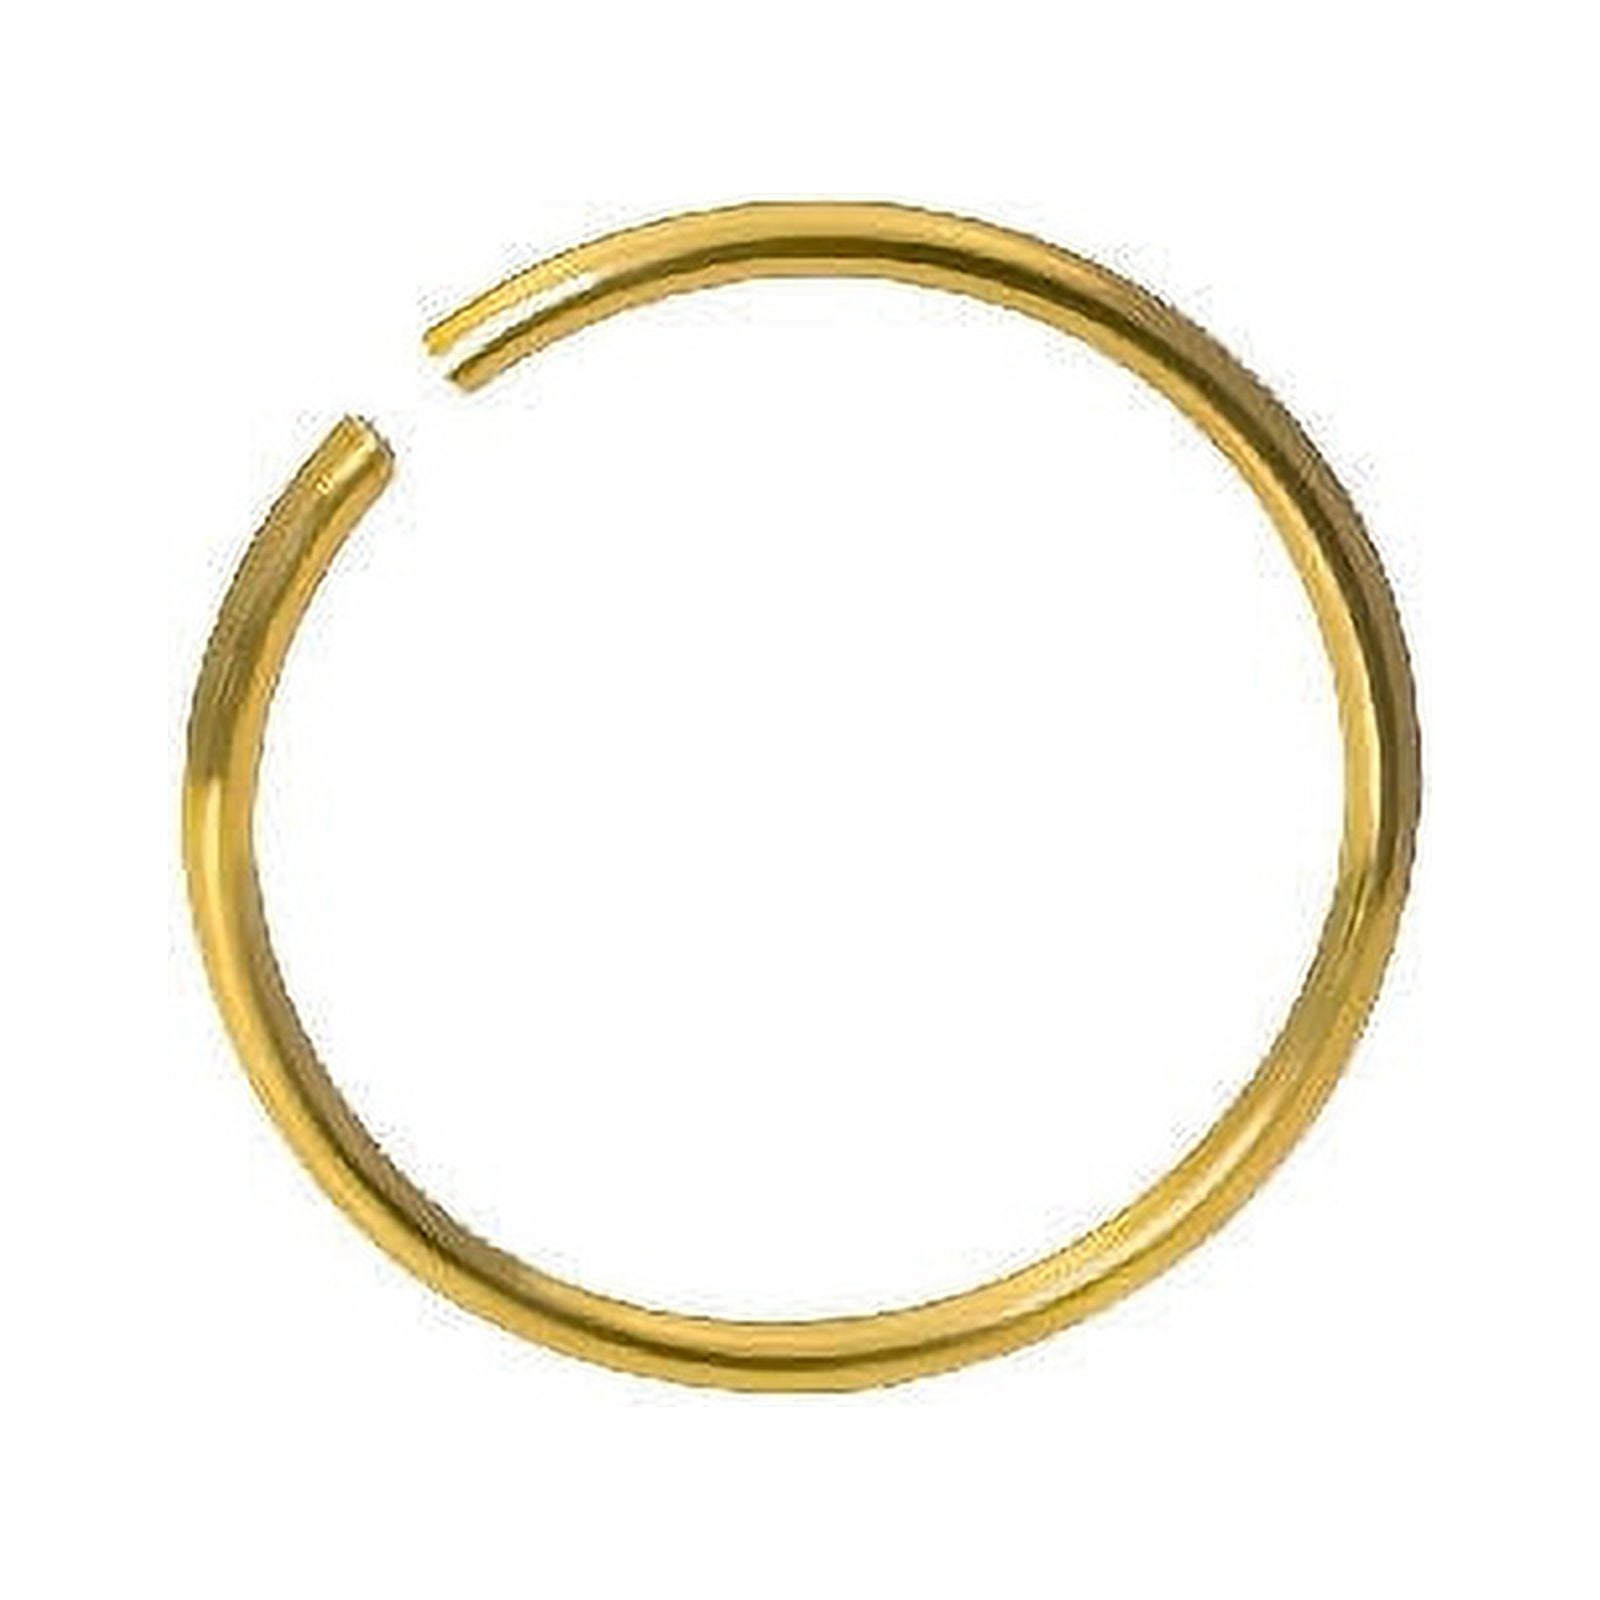 Buy 22ct Gold Coiled Hoop Nose Ring Online at Purejewels UK